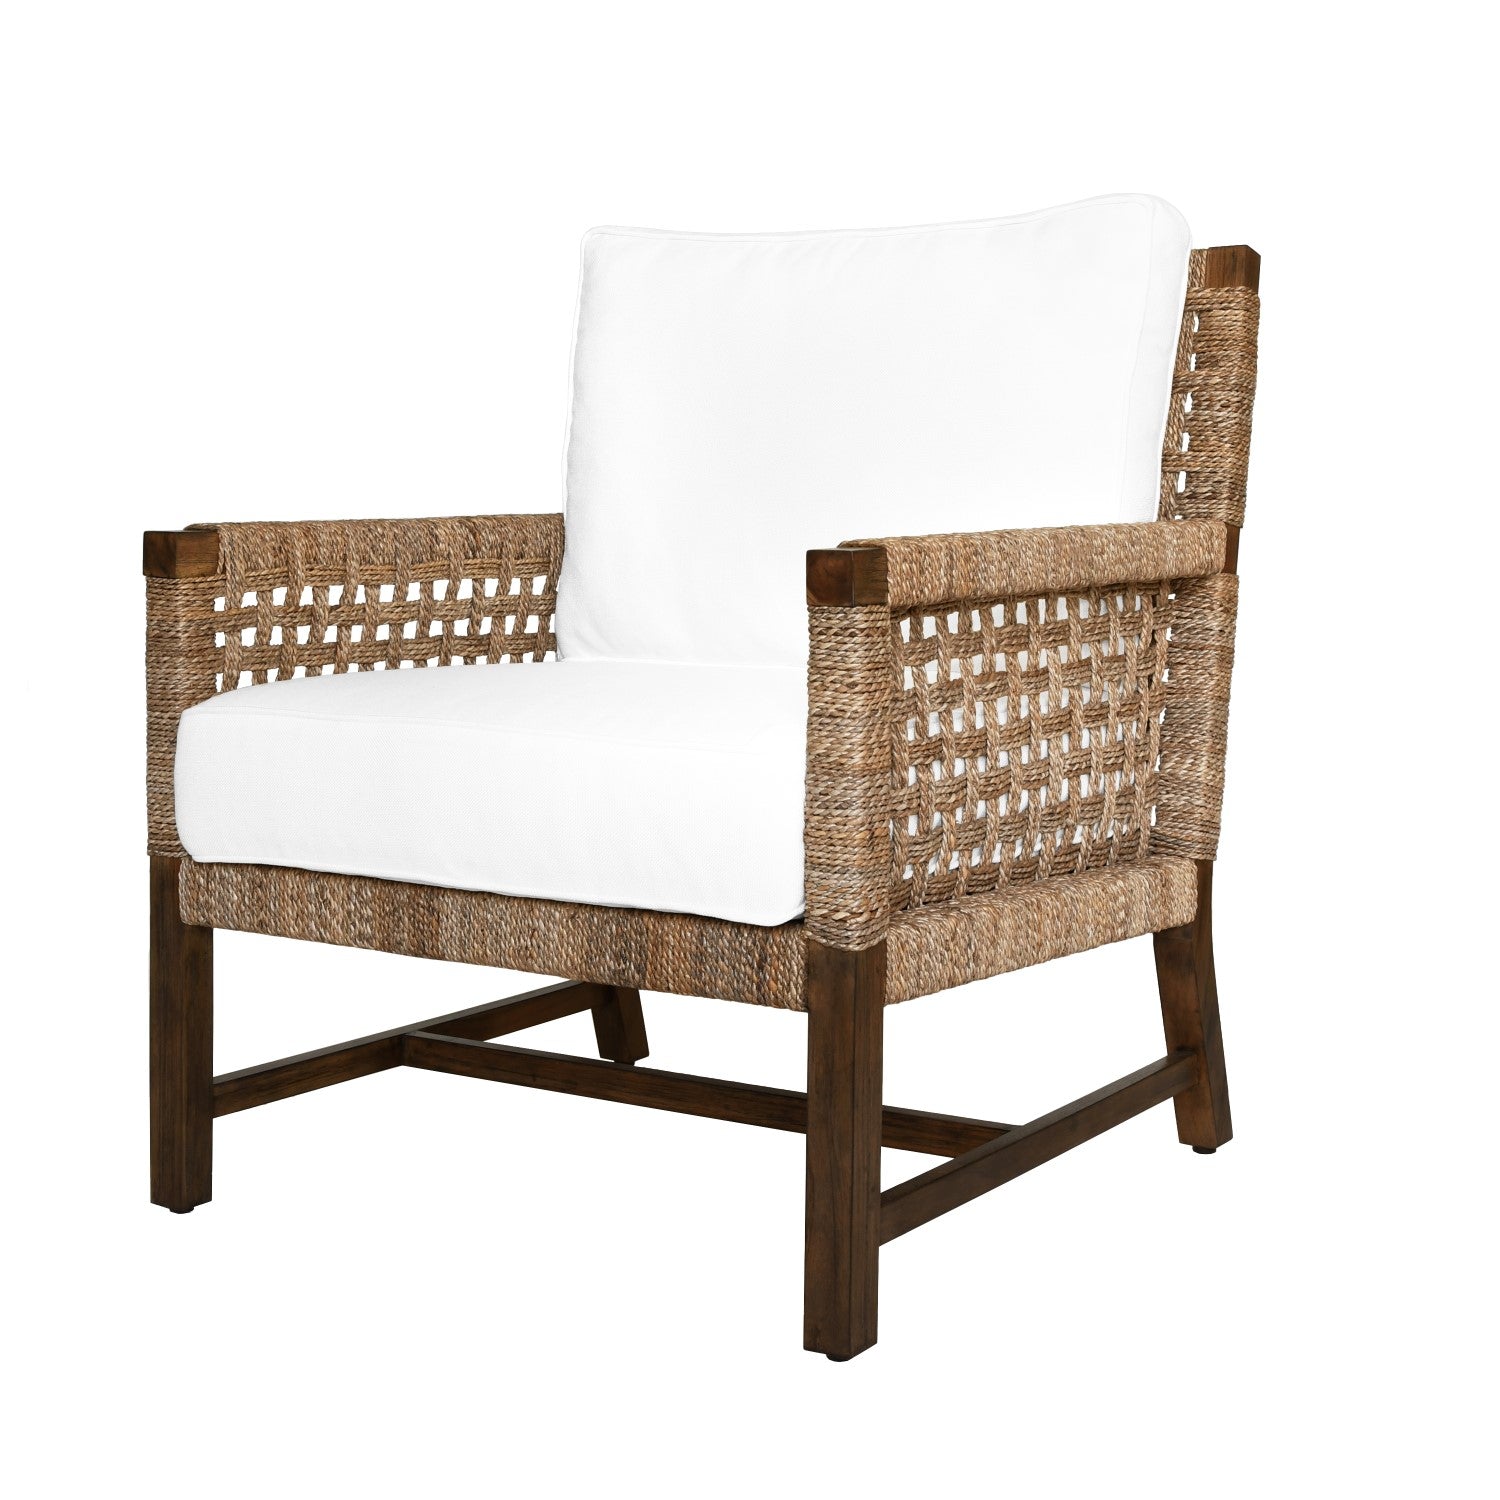 Shop Club Chair With Woven Seagrass Detail | Burke Decor